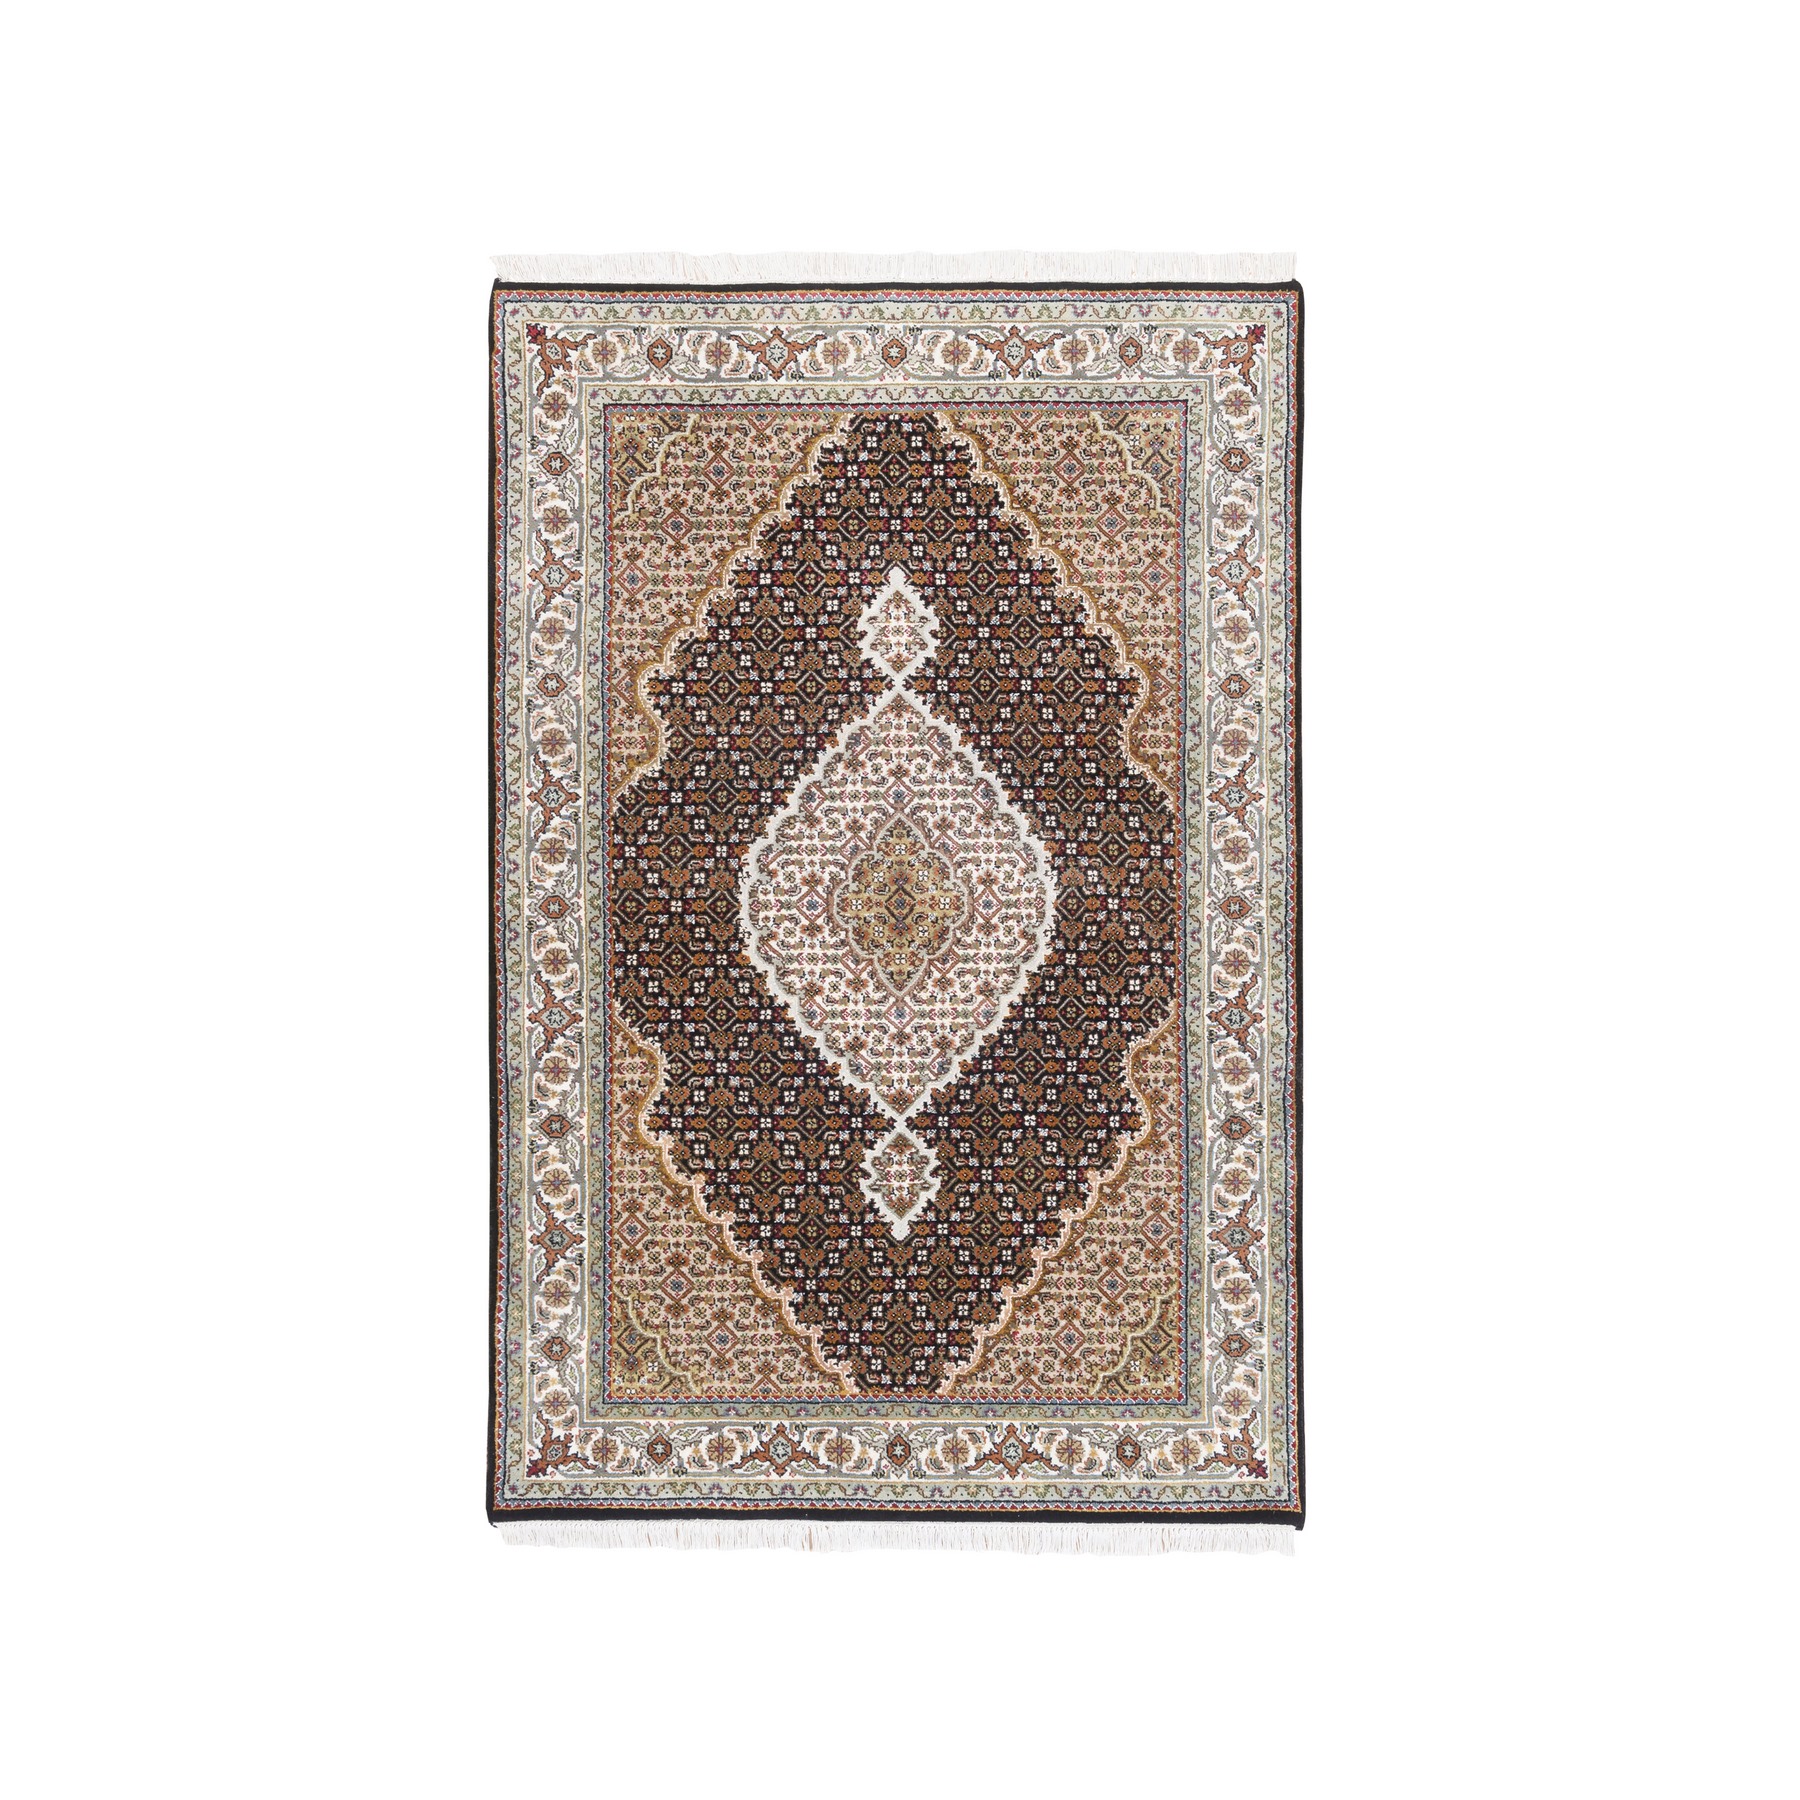 Pirniakan Collection Hand Knotted Black Rug No: 1125238